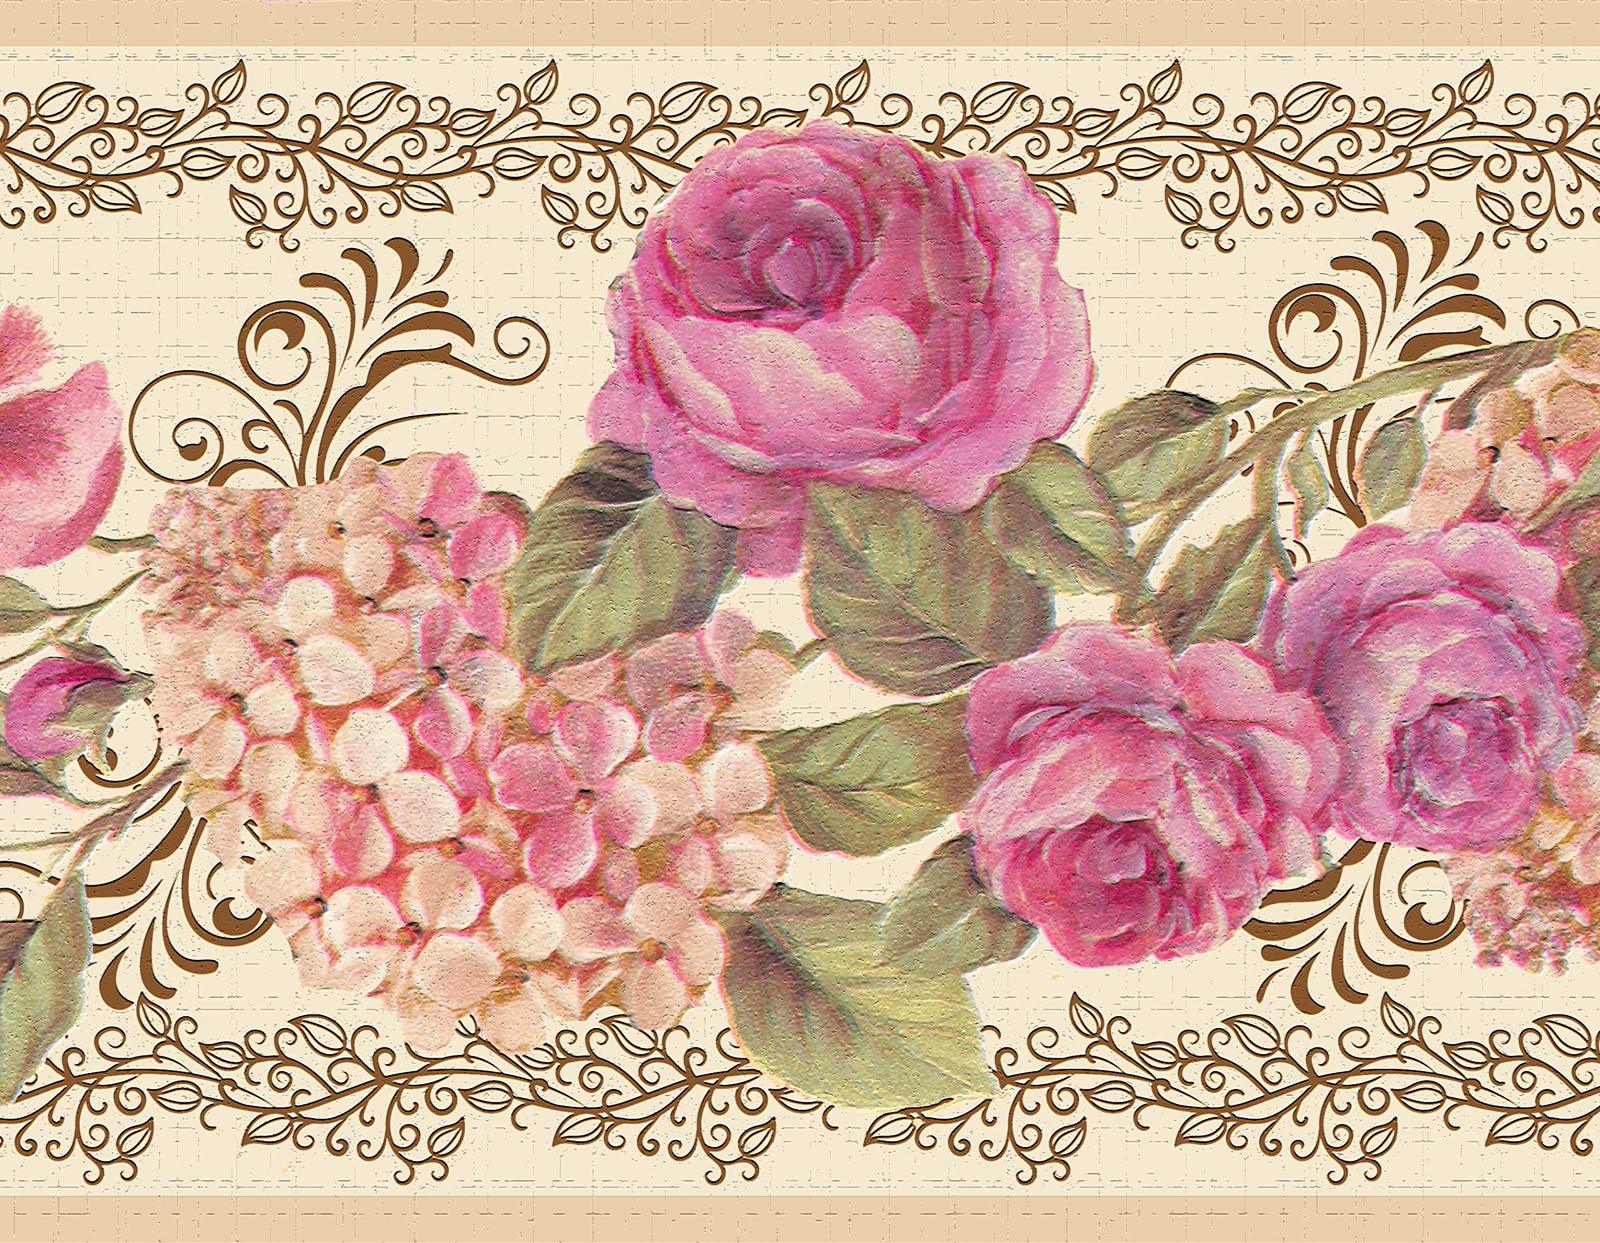 Primary image for Dundee Deco DDAZBD9066 Peel and Stick Wallpaper Border - Floral Pink, Cream Rose